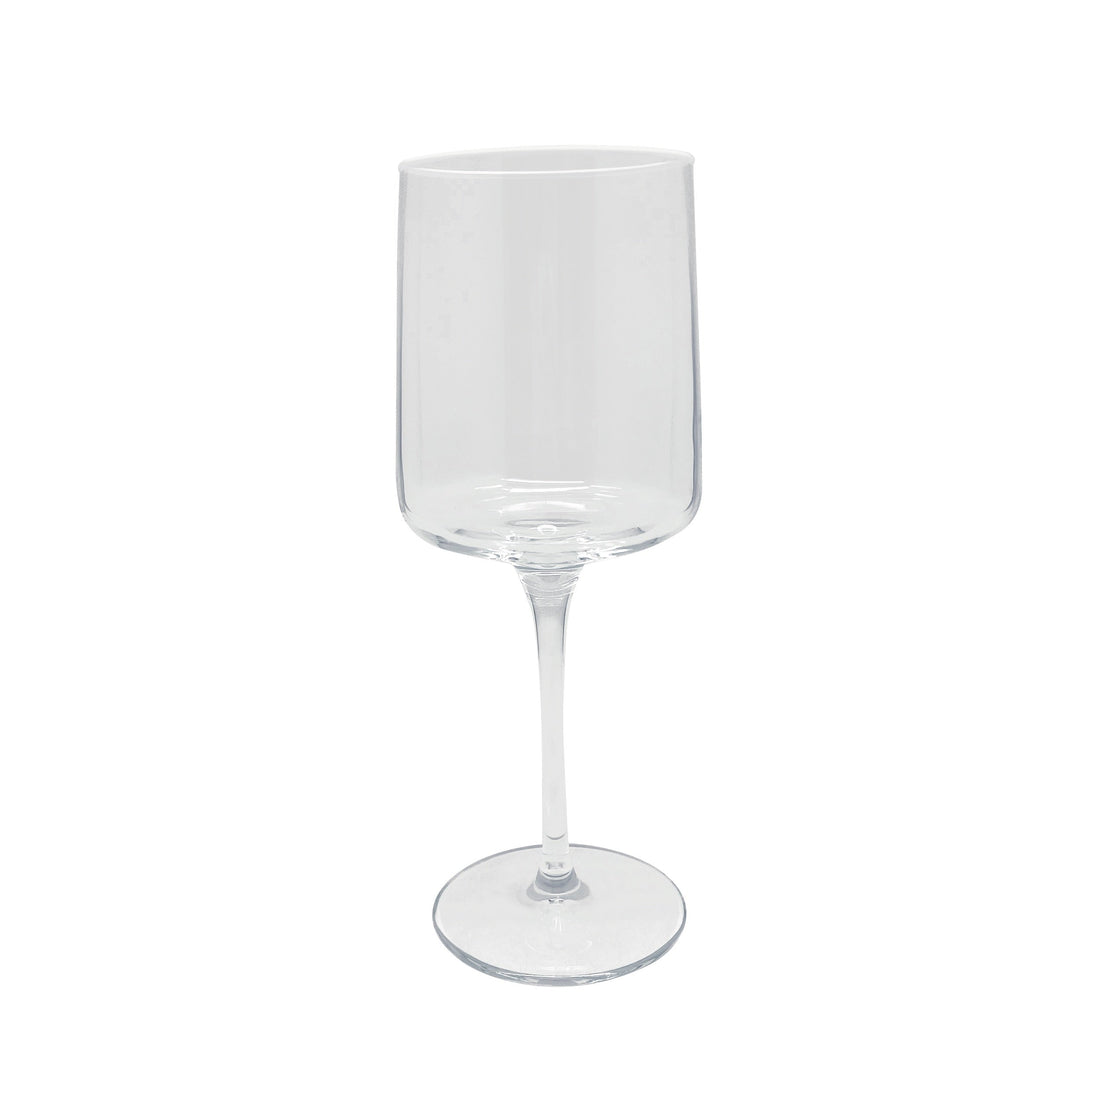 Fine Line Clear with White Rim Wine Glass Set of 4